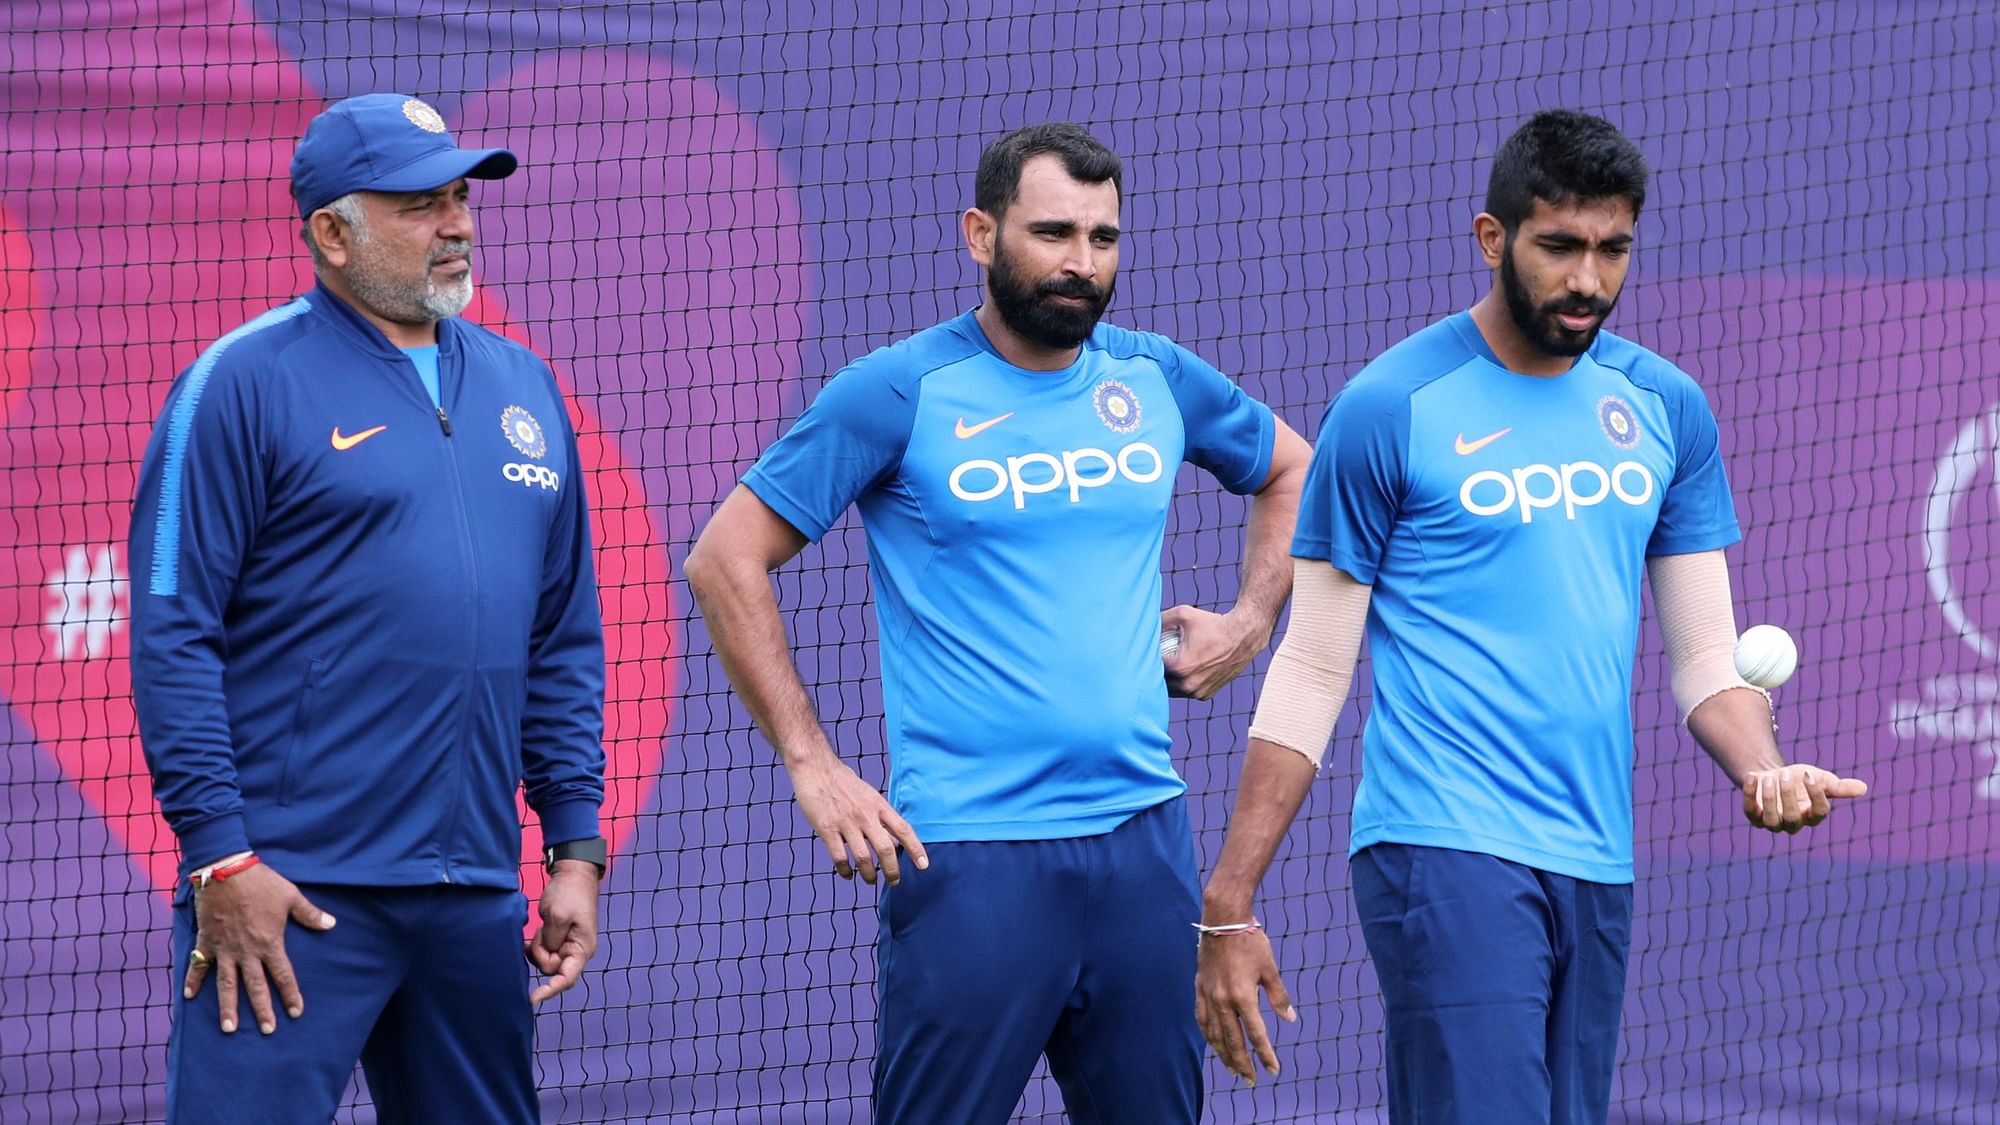 Virat Kohli has said 3 spots have been booked in India’s pace attack for the 2020 T20 World Cup.